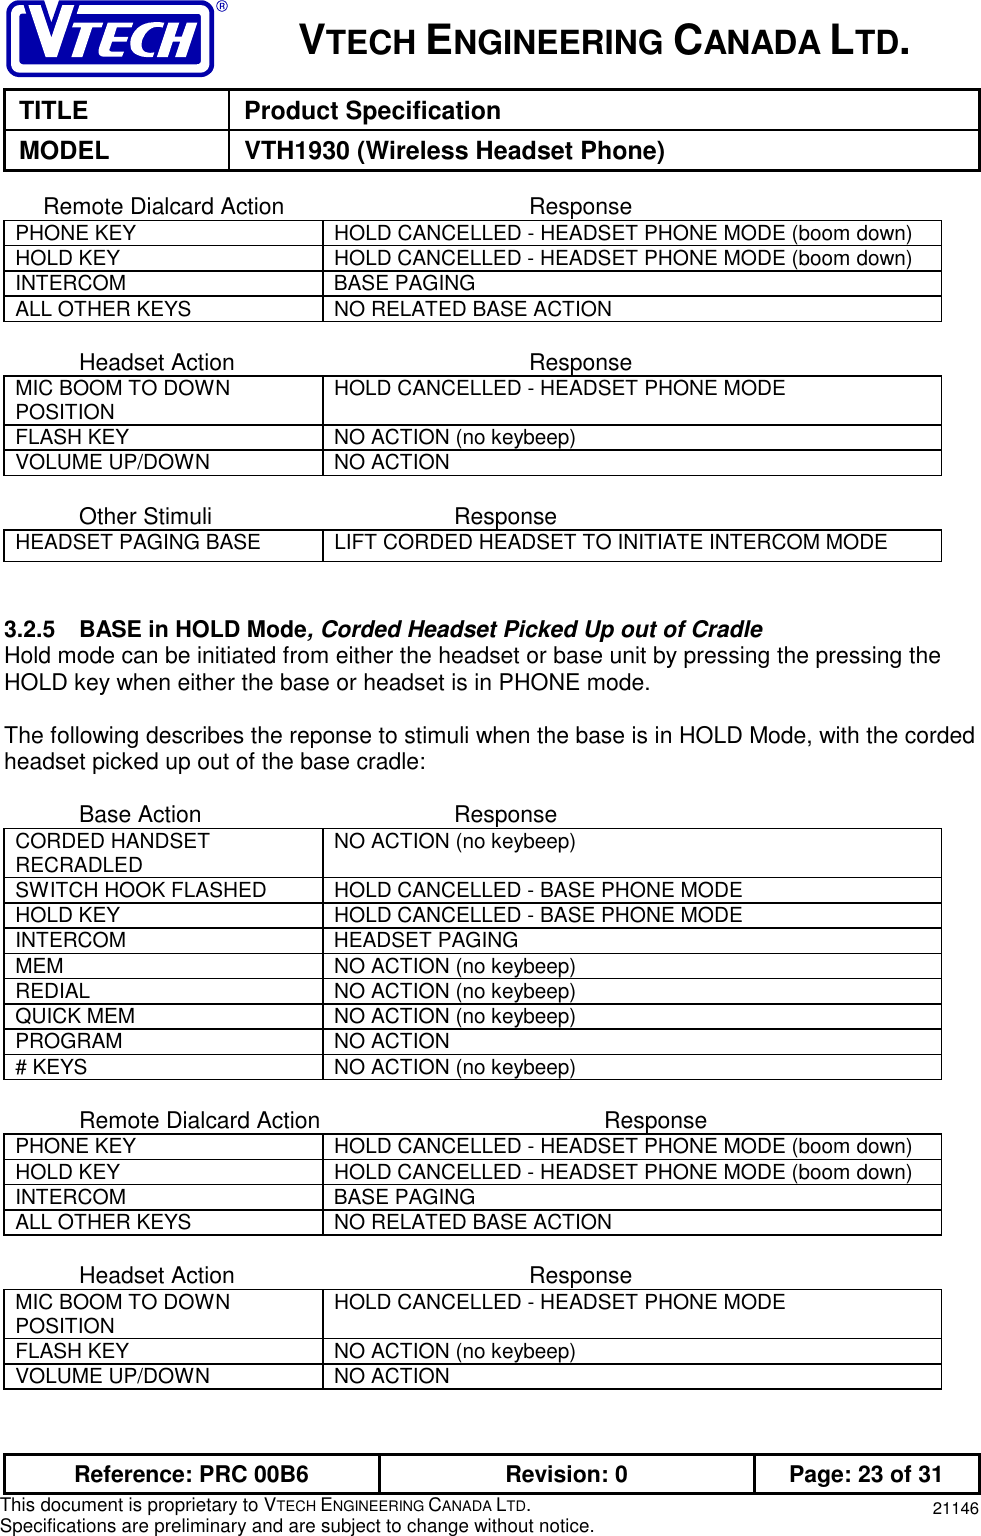 VTECH ENGINEERING CANADA LTD.TITLE Product SpecificationMODEL VTH1930 (Wireless Headset Phone)Reference: PRC 00B6 Revision: 0 Page: 23 of 31This document is proprietary to VTECH ENGINEERING CANADA LTD.Specifications are preliminary and are subject to change without notice. 21146      Remote Dialcard Action ResponsePHONE KEY HOLD CANCELLED - HEADSET PHONE MODE (boom down)HOLD KEY HOLD CANCELLED - HEADSET PHONE MODE (boom down)INTERCOM BASE PAGINGALL OTHER KEYS NO RELATED BASE ACTIONHeadset Action ResponseMIC BOOM TO DOWNPOSITION HOLD CANCELLED - HEADSET PHONE MODEFLASH KEY NO ACTION (no keybeep)VOLUME UP/DOWN NO ACTIONOther Stimuli ResponseHEADSET PAGING BASE LIFT CORDED HEADSET TO INITIATE INTERCOM MODE3.2.5 BASE in HOLD Mode, Corded Headset Picked Up out of CradleHold mode can be initiated from either the headset or base unit by pressing the pressing theHOLD key when either the base or headset is in PHONE mode.The following describes the reponse to stimuli when the base is in HOLD Mode, with the cordedheadset picked up out of the base cradle:Base Action ResponseCORDED HANDSETRECRADLED NO ACTION (no keybeep)SWITCH HOOK FLASHED HOLD CANCELLED - BASE PHONE MODEHOLD KEY HOLD CANCELLED - BASE PHONE MODEINTERCOM HEADSET PAGINGMEM NO ACTION (no keybeep)REDIAL NO ACTION (no keybeep)QUICK MEM NO ACTION (no keybeep)PROGRAM NO ACTION# KEYS NO ACTION (no keybeep)Remote Dialcard Action ResponsePHONE KEY HOLD CANCELLED - HEADSET PHONE MODE (boom down)HOLD KEY HOLD CANCELLED - HEADSET PHONE MODE (boom down)INTERCOM BASE PAGINGALL OTHER KEYS NO RELATED BASE ACTIONHeadset Action ResponseMIC BOOM TO DOWNPOSITION HOLD CANCELLED - HEADSET PHONE MODEFLASH KEY NO ACTION (no keybeep)VOLUME UP/DOWN NO ACTION